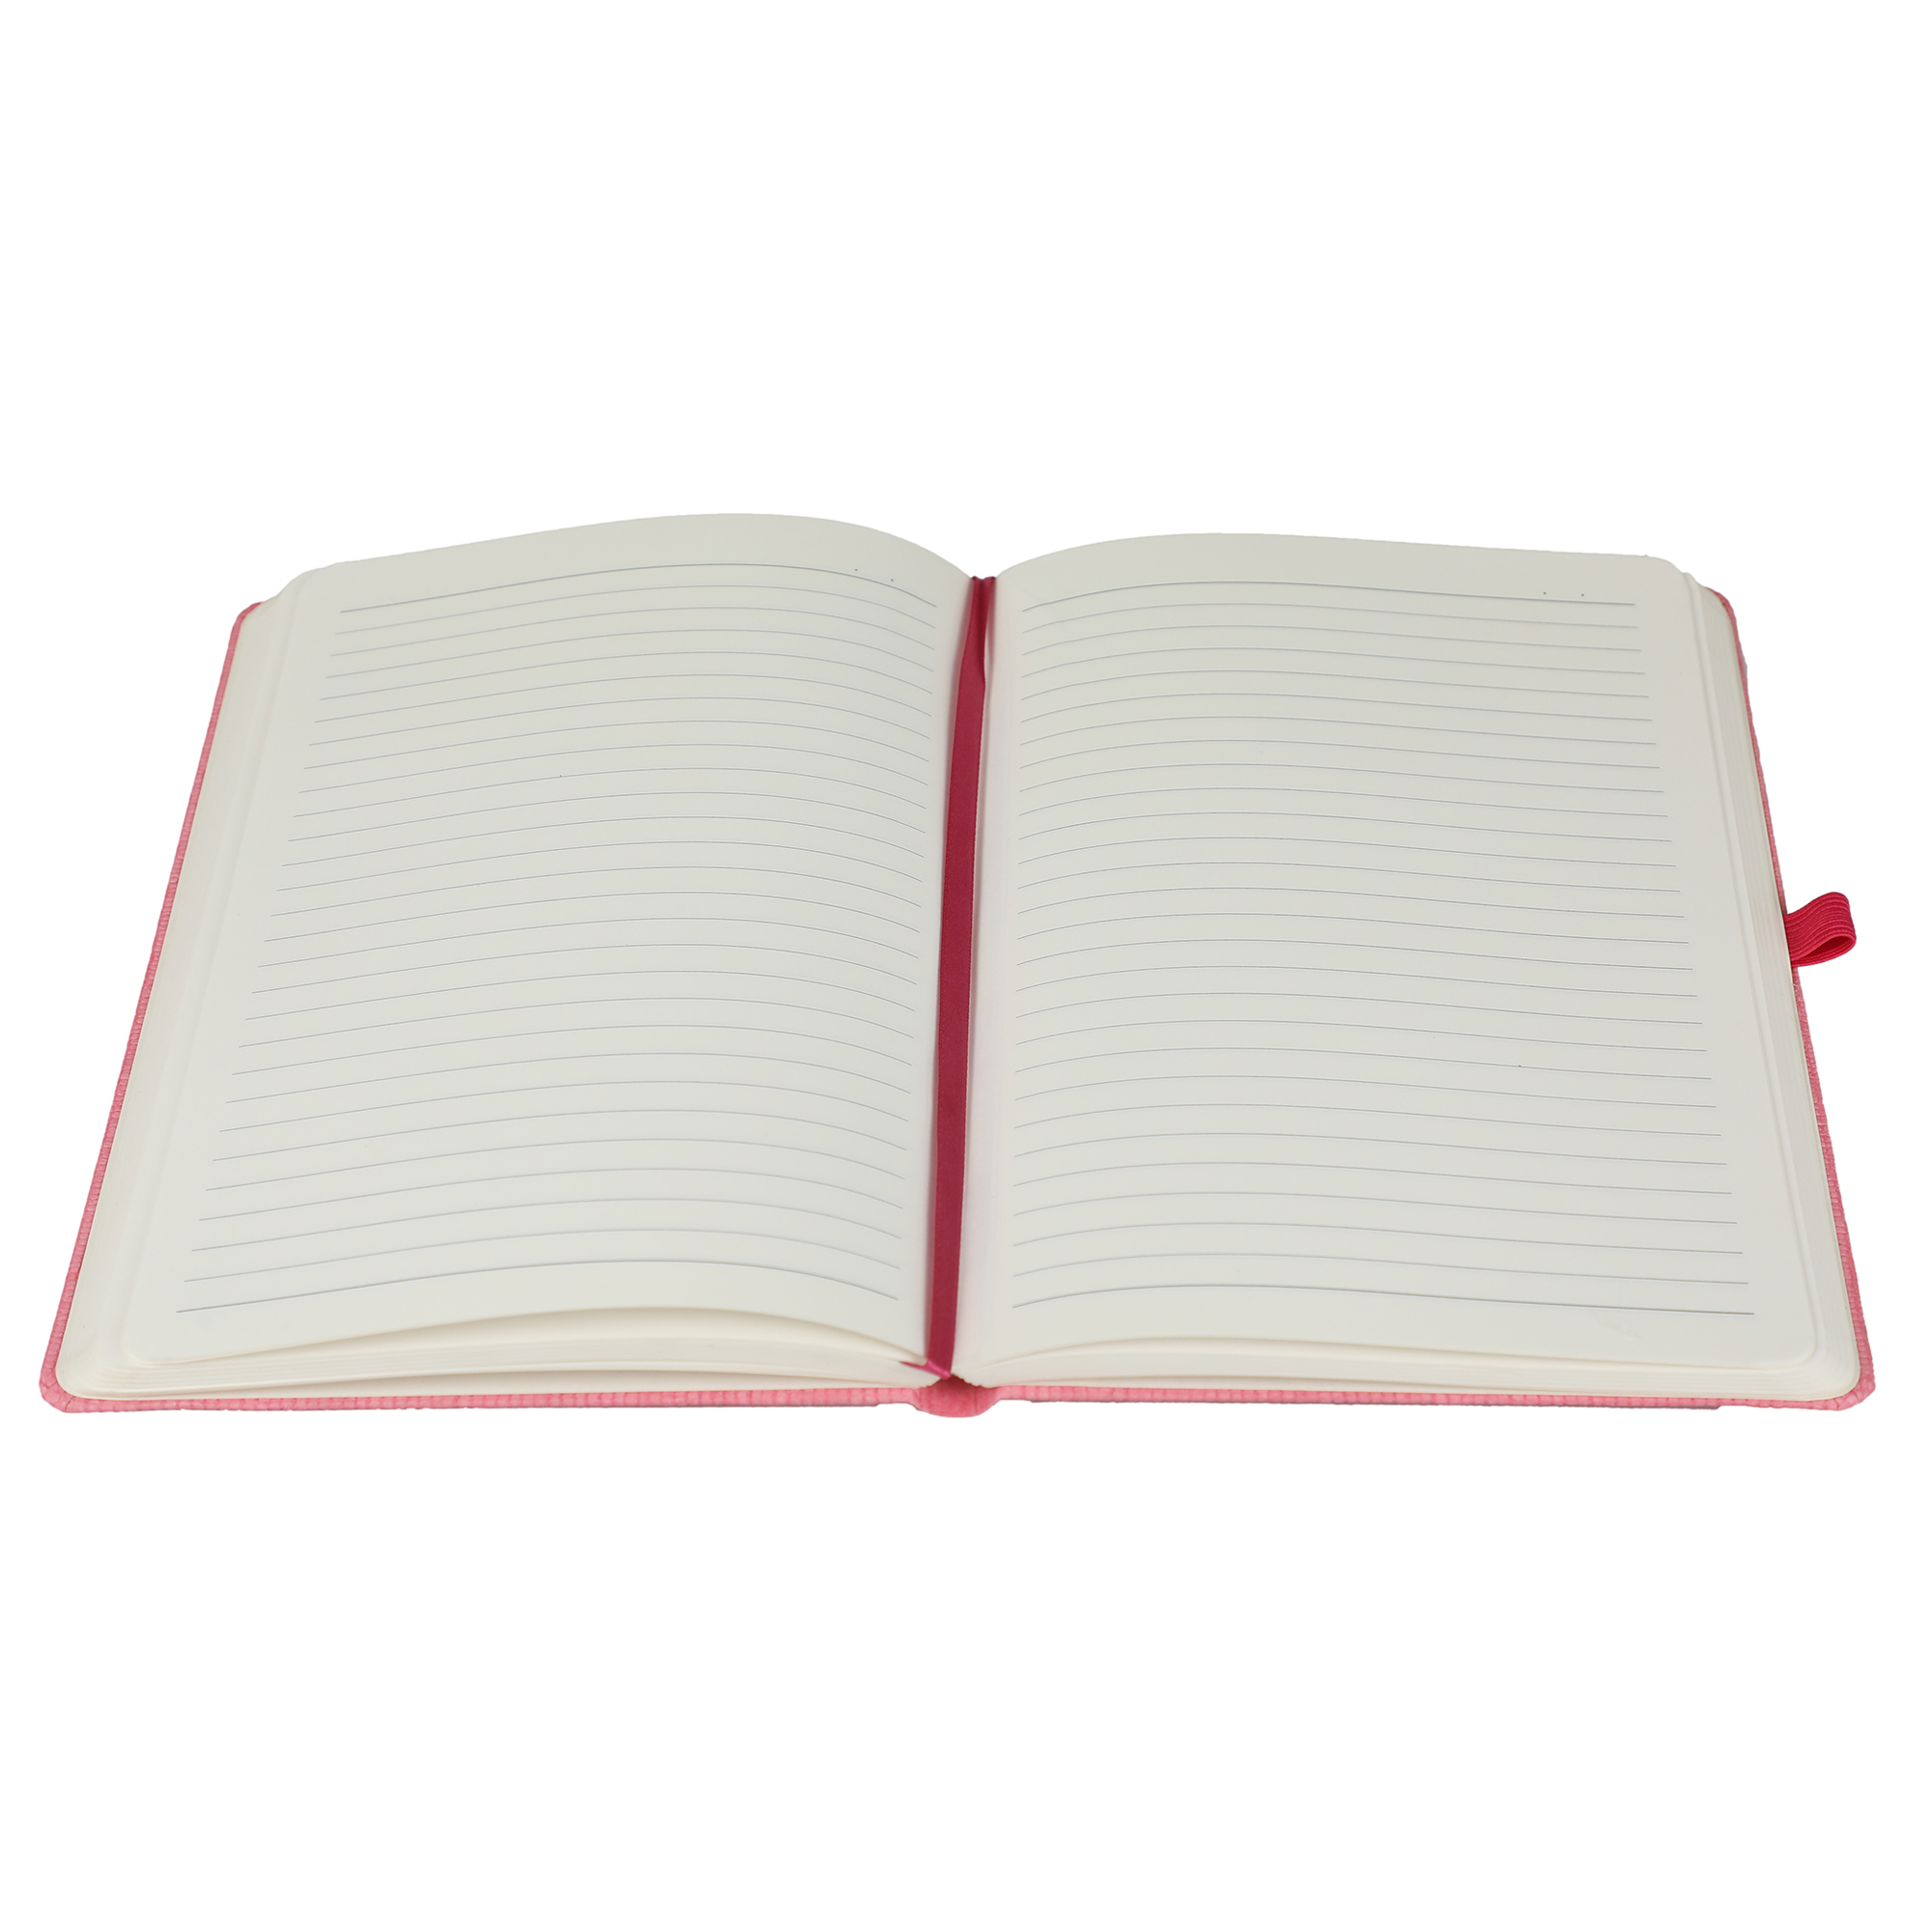 Comma Abaca - A5 Size - Hard Bound Notebook (Pink)